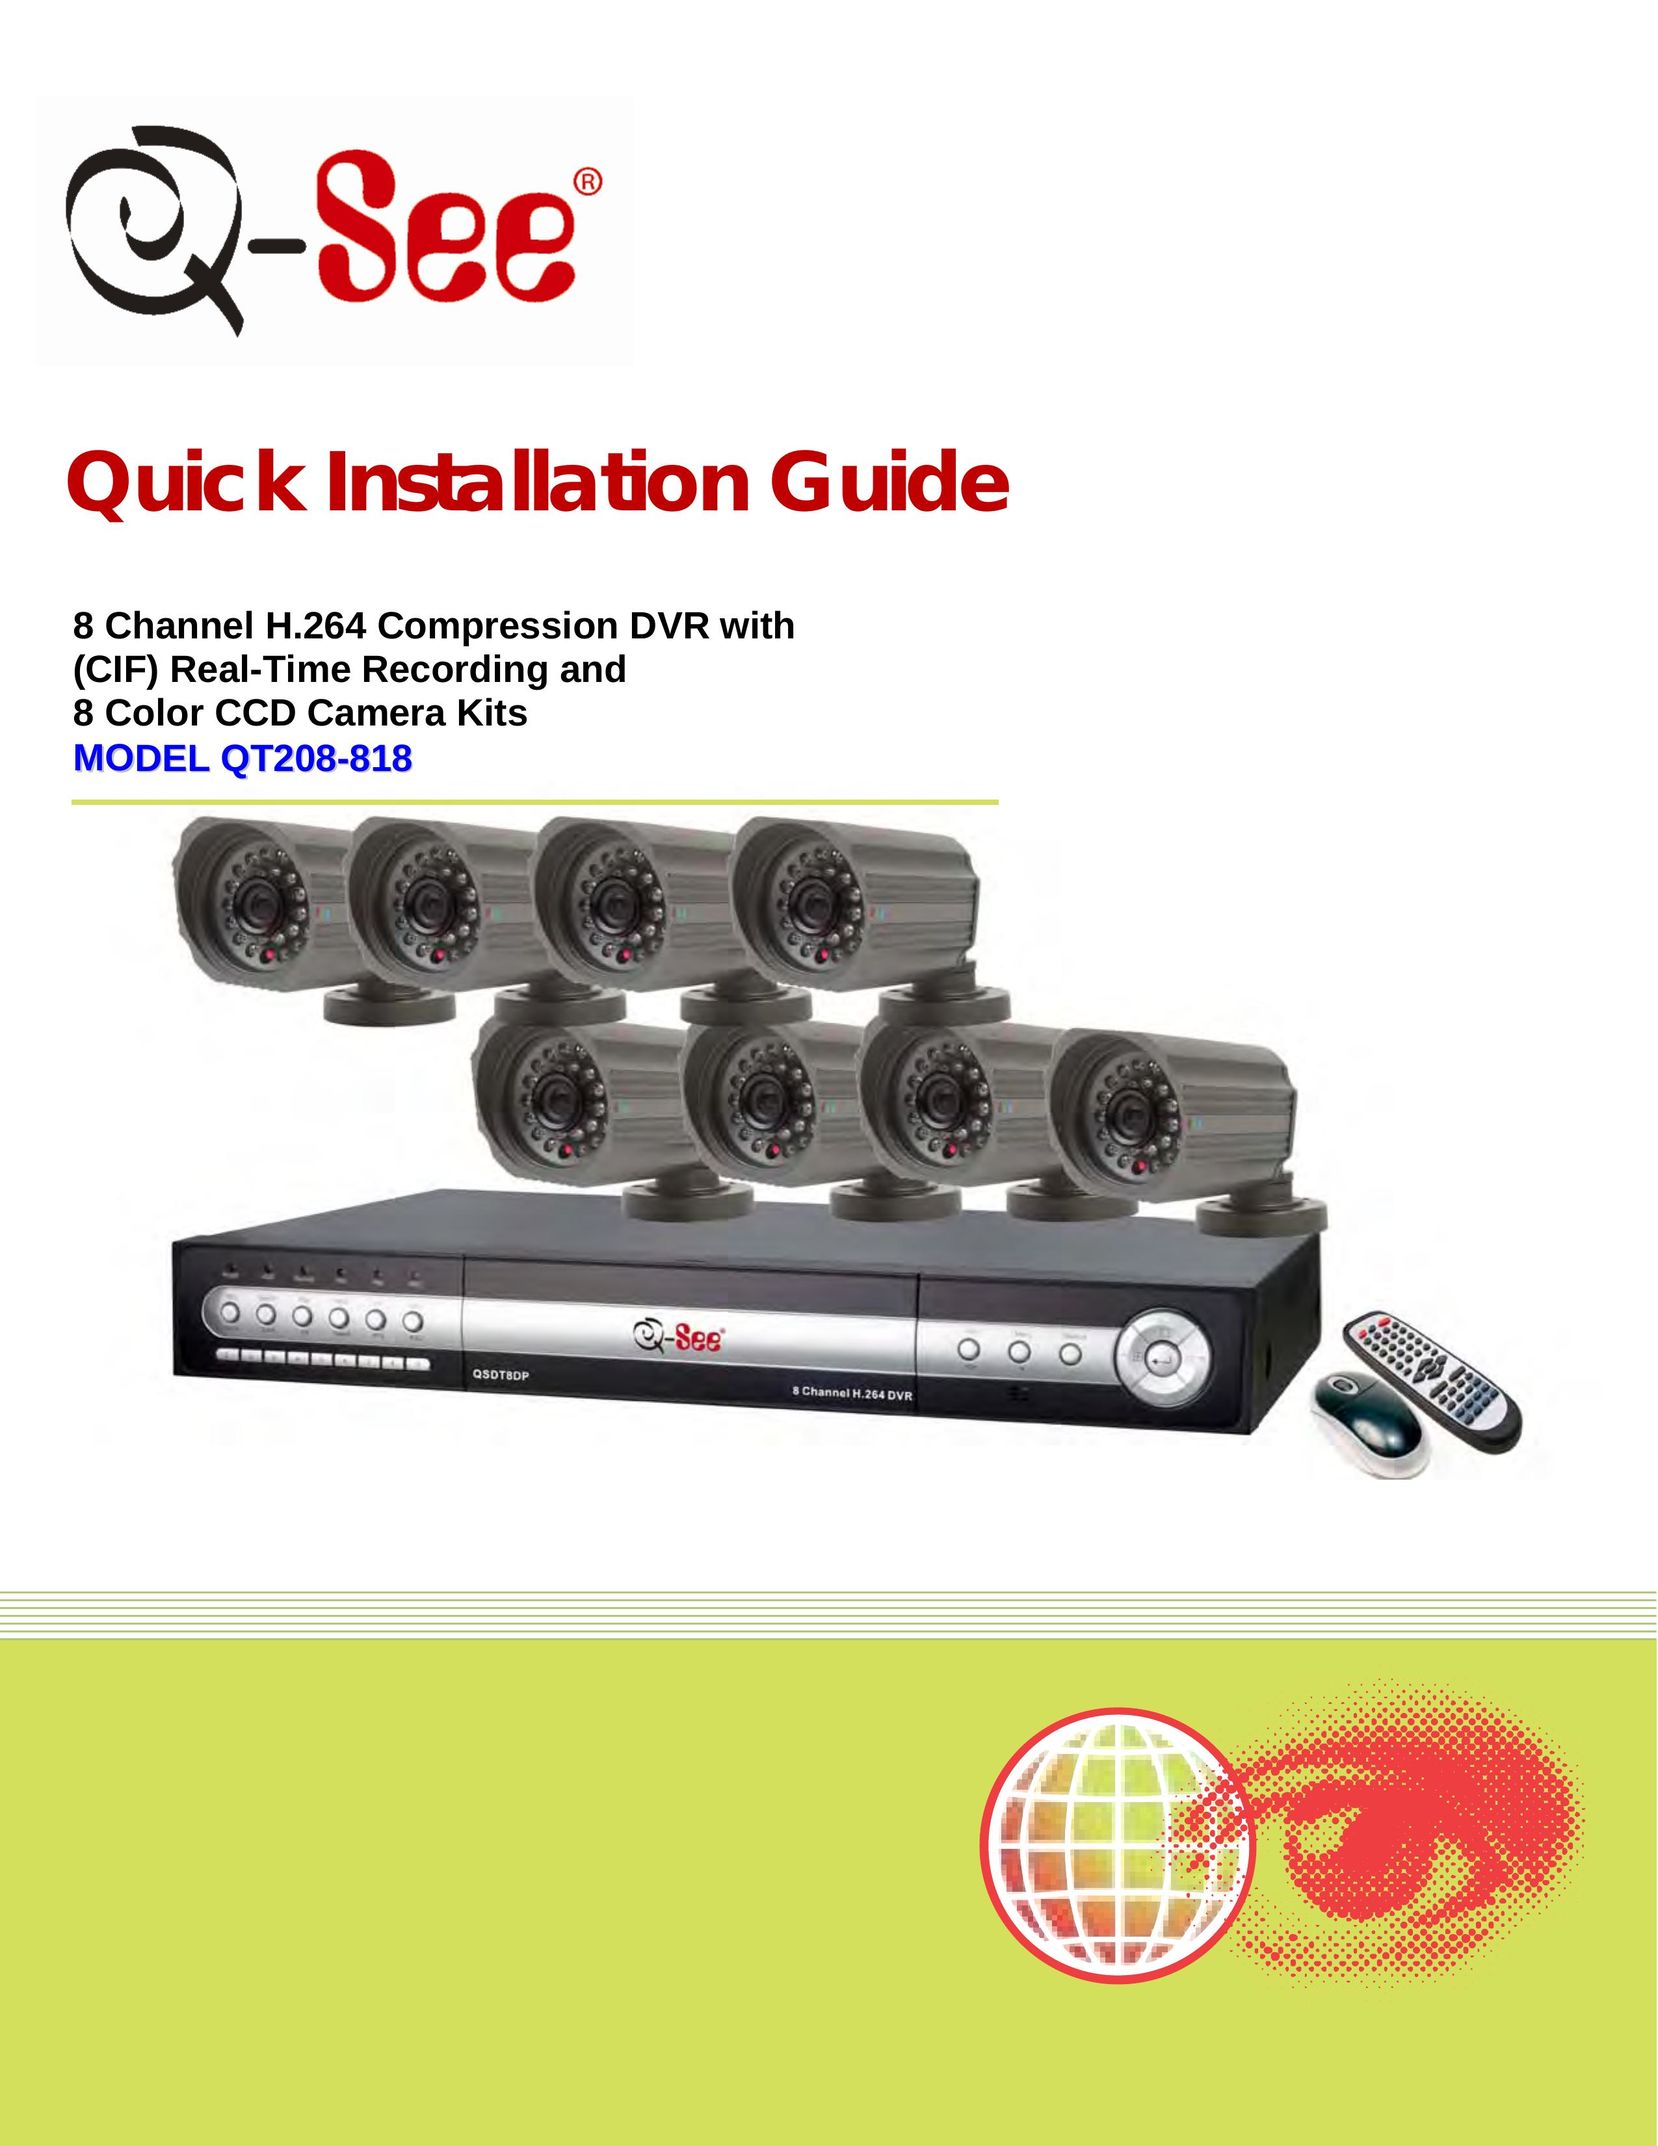 Q-See QT208-818 Home Security System User Manual